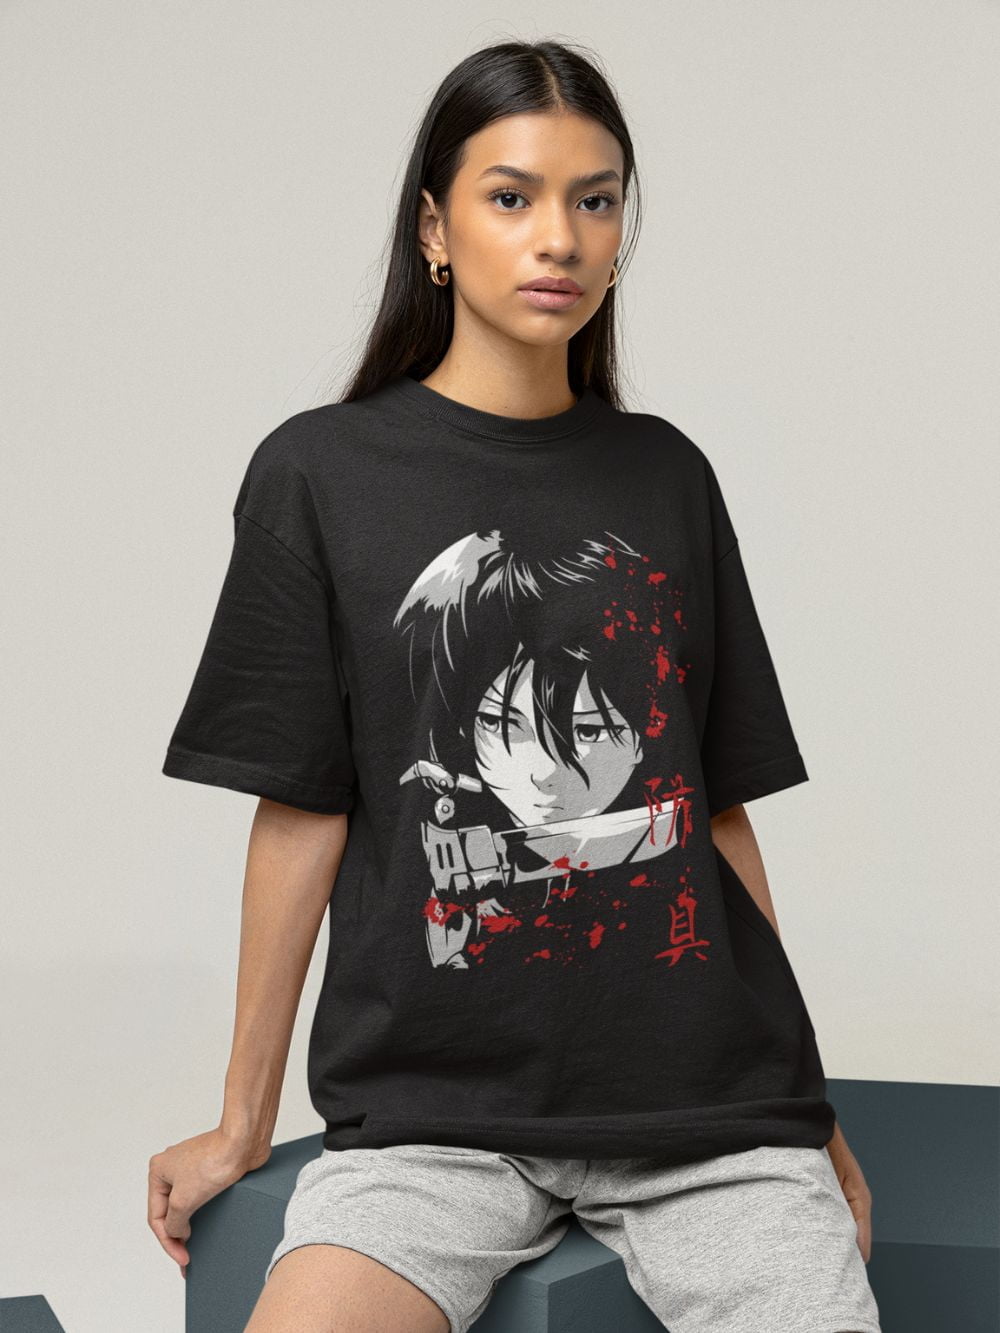 Buy VEENSHI I just Really Love Anime Quote Oversized Tshirt for Girls 100%  Cotton Anime Tshirts (Black, M) at Amazon.in